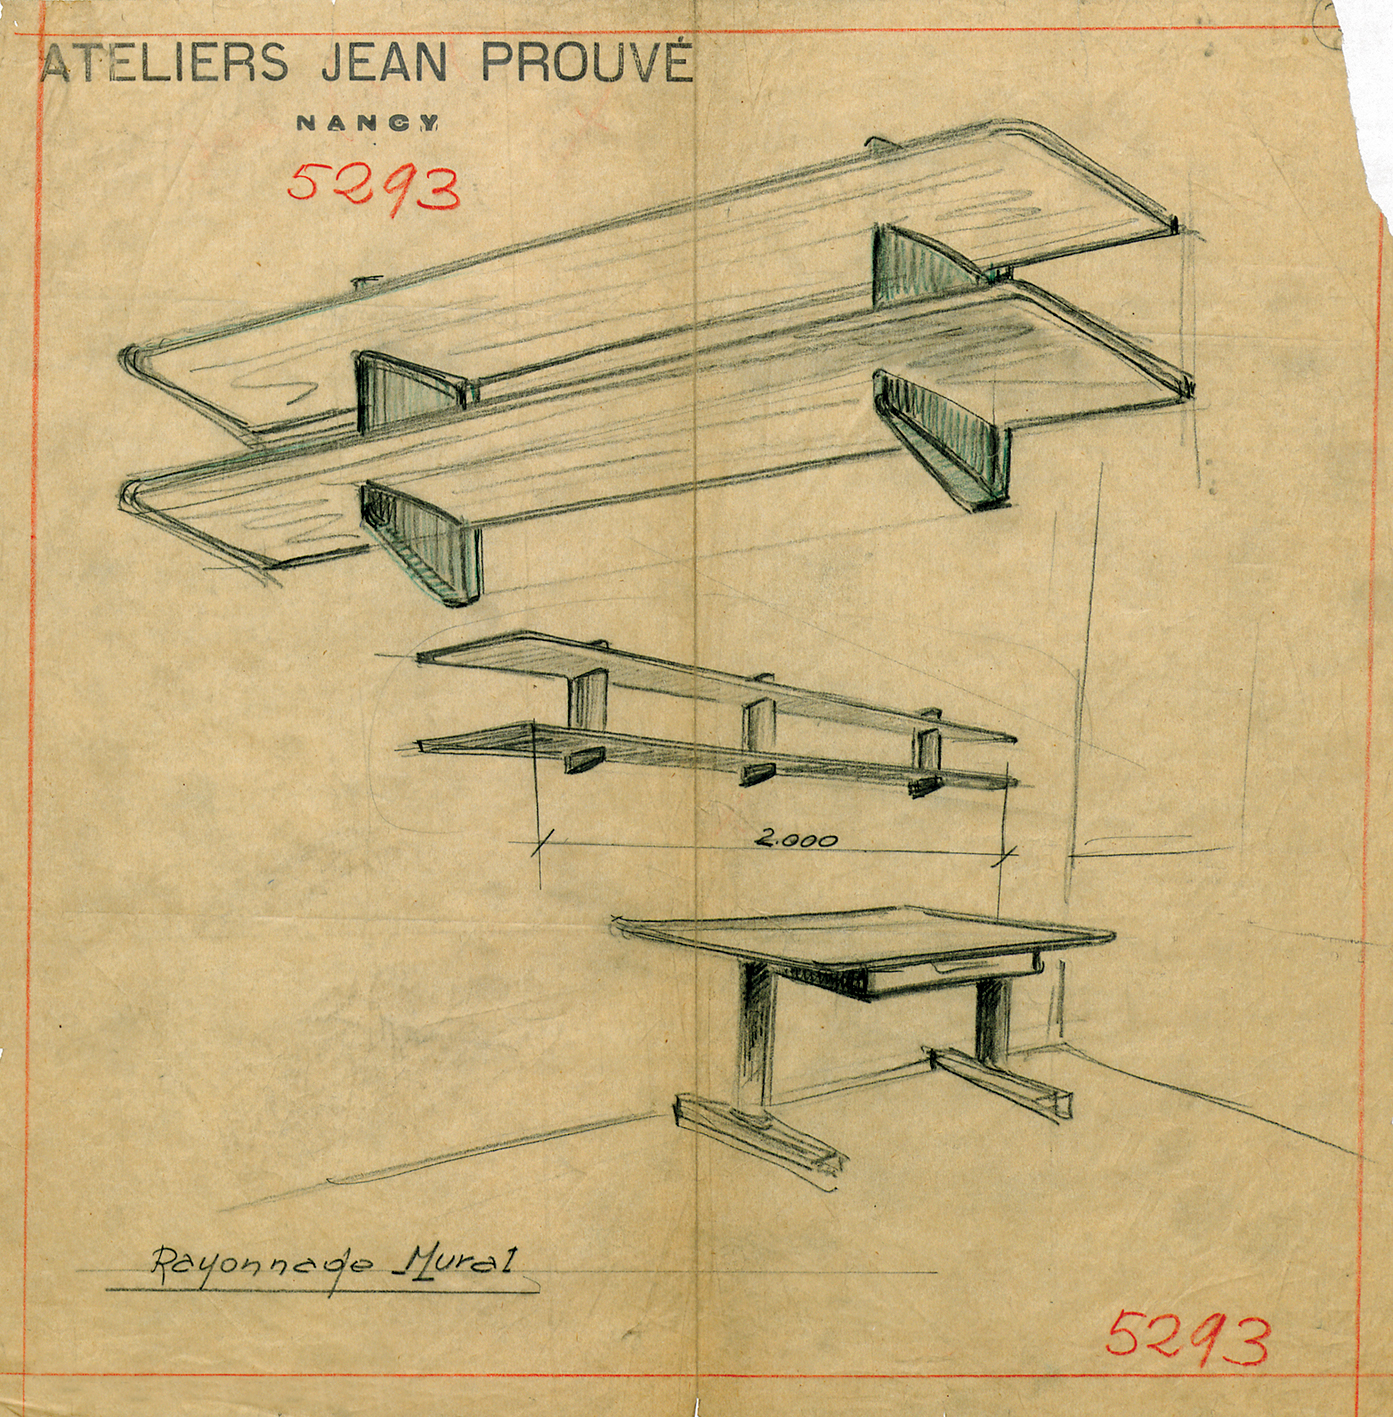 “Wall shelving”. Single and double models for the École Nationale Professionnelle in Metz. Ateliers Jean Prouvé drawing no. 5293, 20 April 1935.